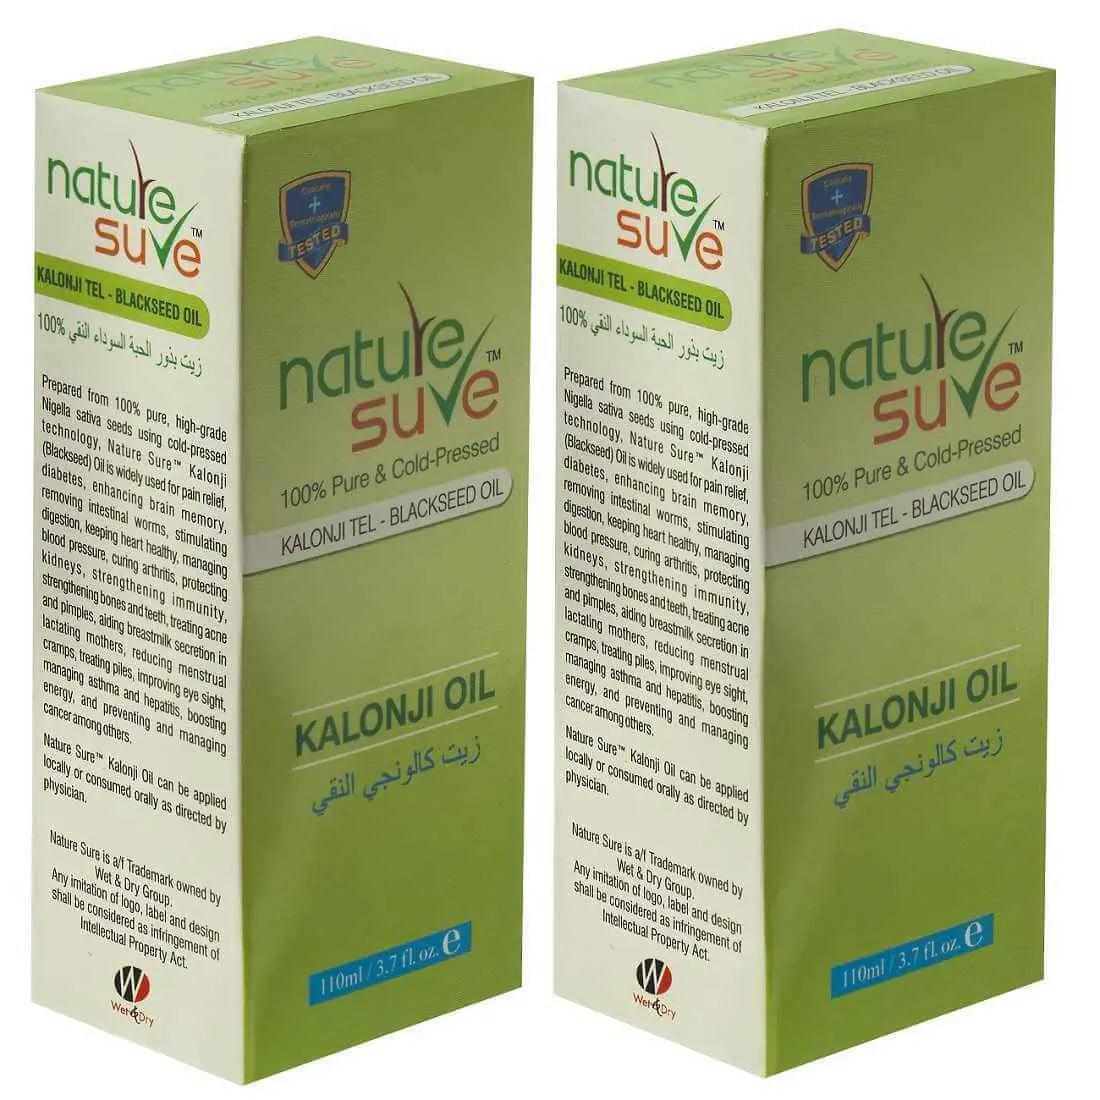 Nature Sure Kalonji Tail (Blackseed Oil) - 100% Pure and Cold-Pressed - 110ml 8903540008258